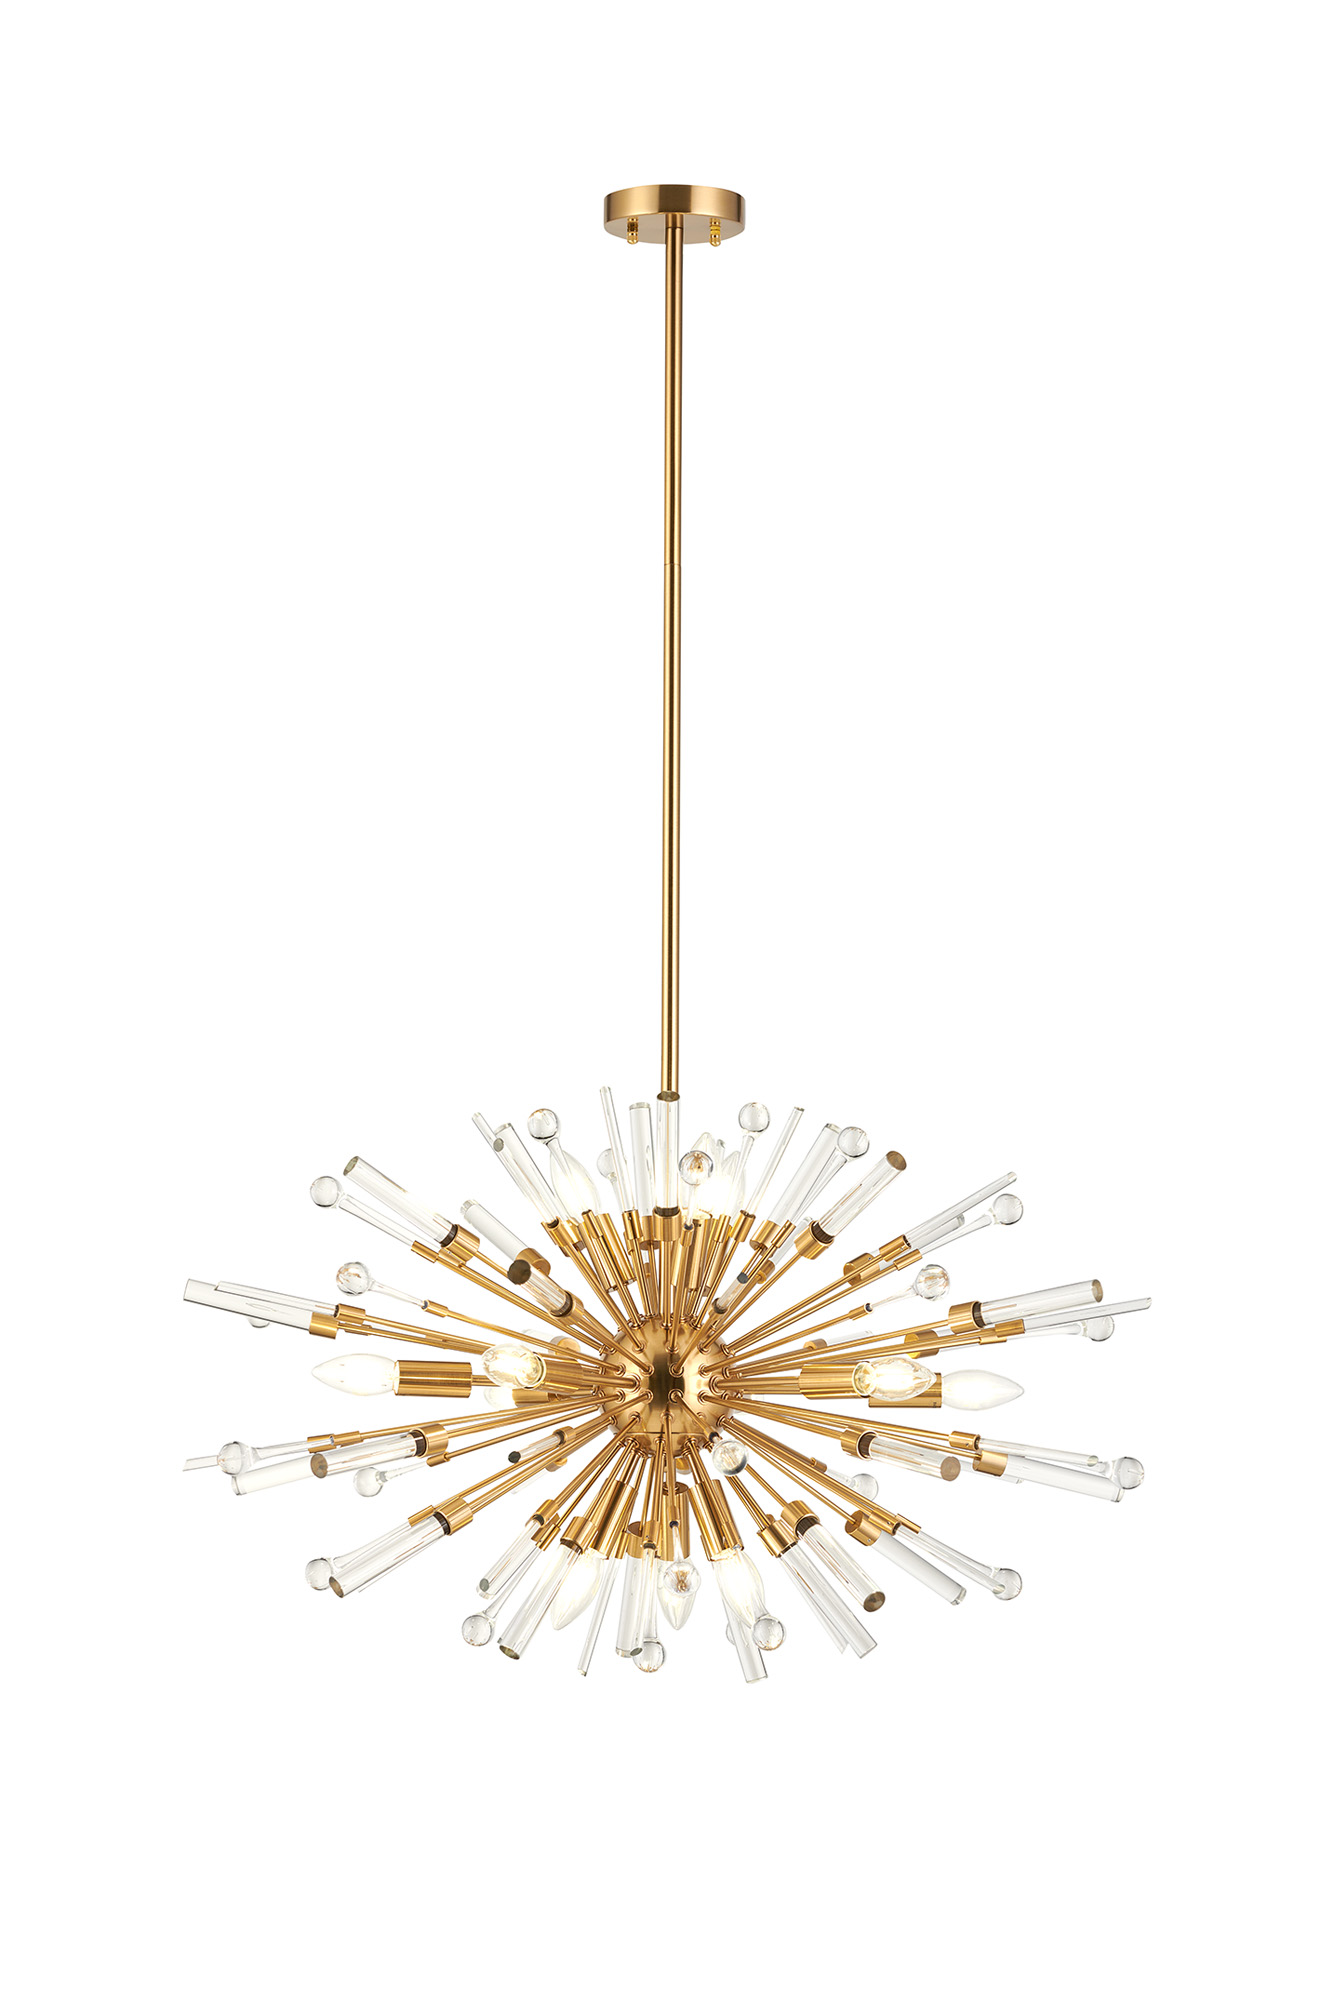 IL32908AG  Noon Oval Pendant 12 Light Antique Gold